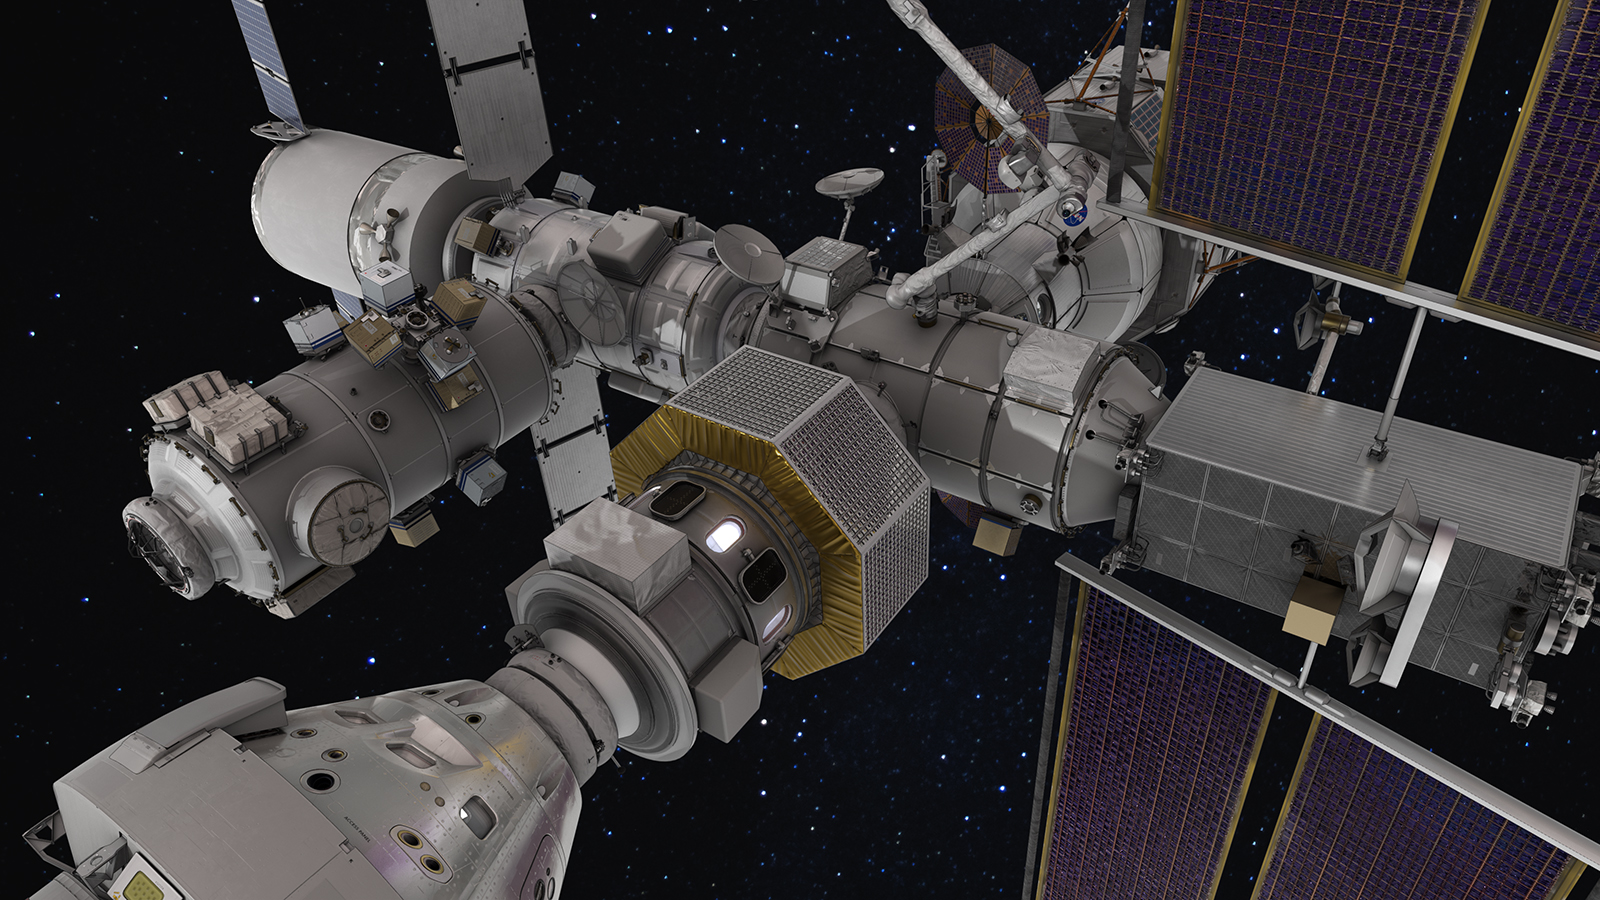 NASA's next space station will be 1,000 times farther from Earth